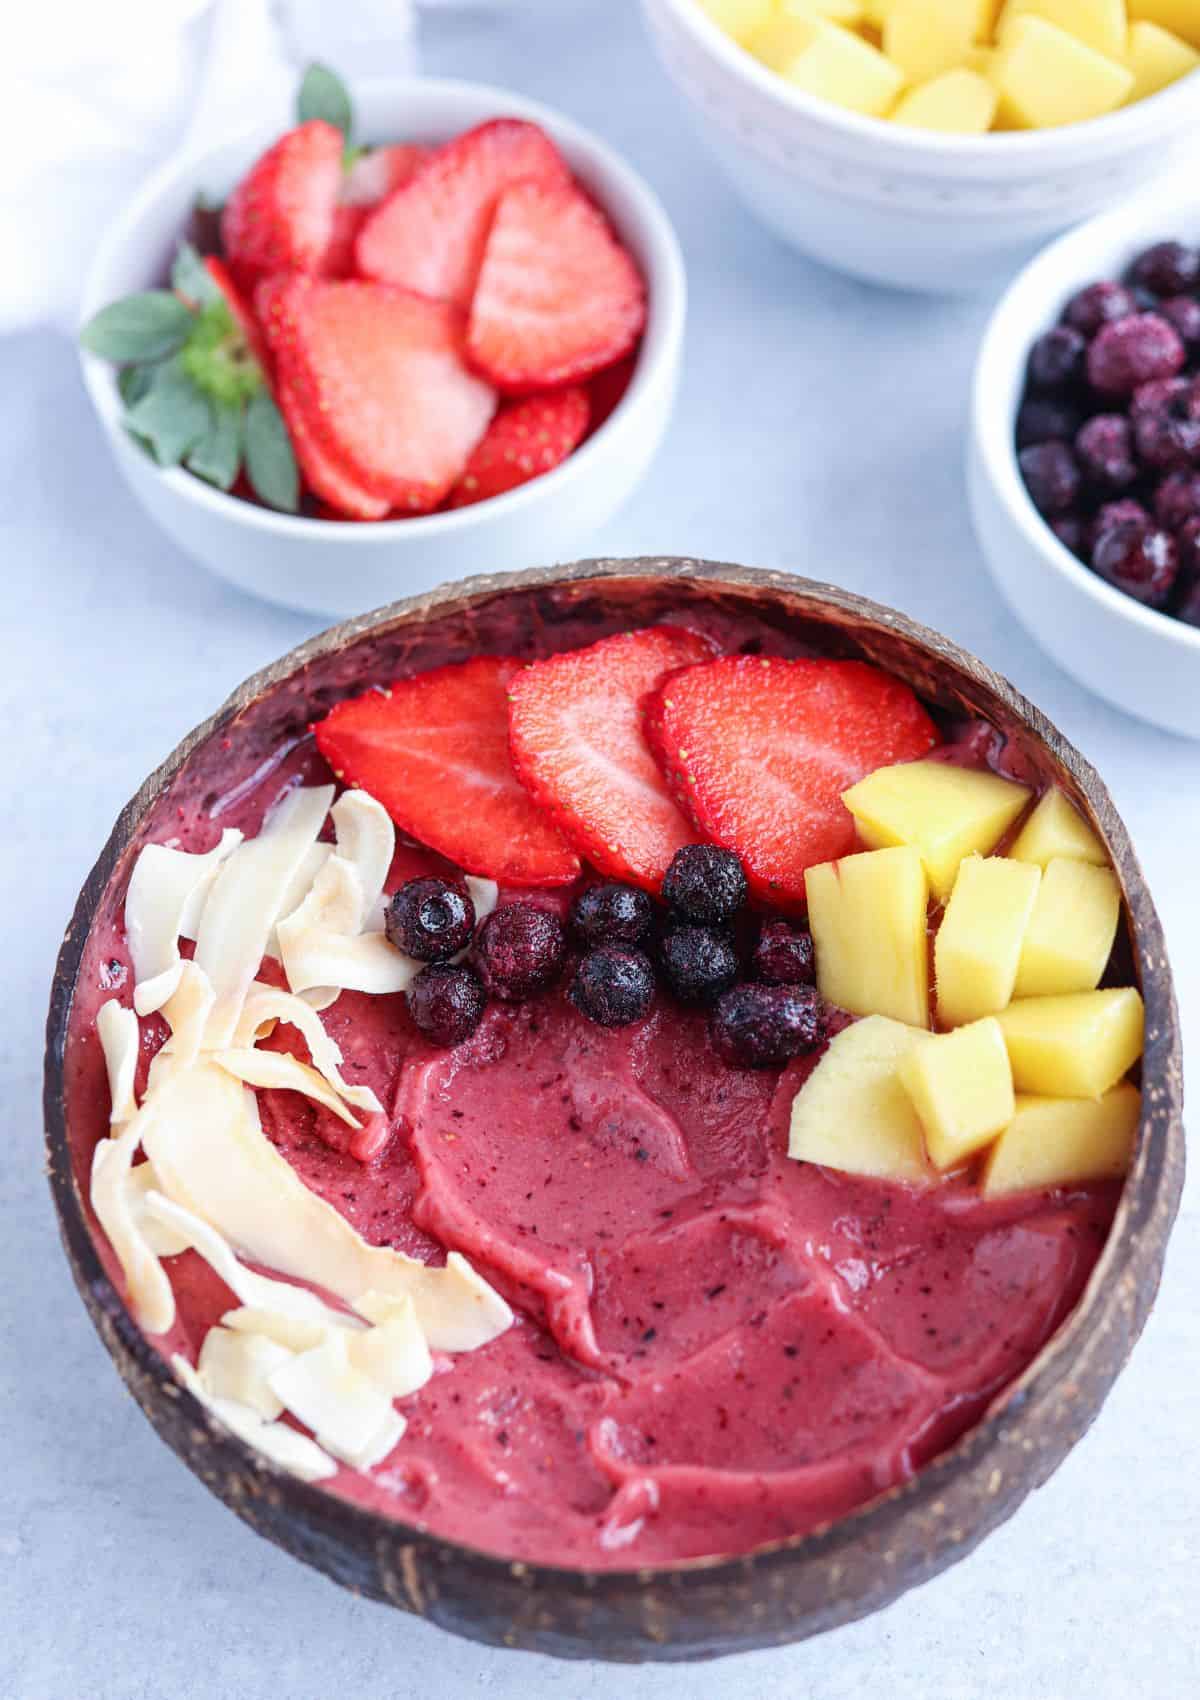 thick smoothie bowl made with frozen berries and mangoes topped with chopped mangoes, sliced strawberries, wild blueberries and coconut.